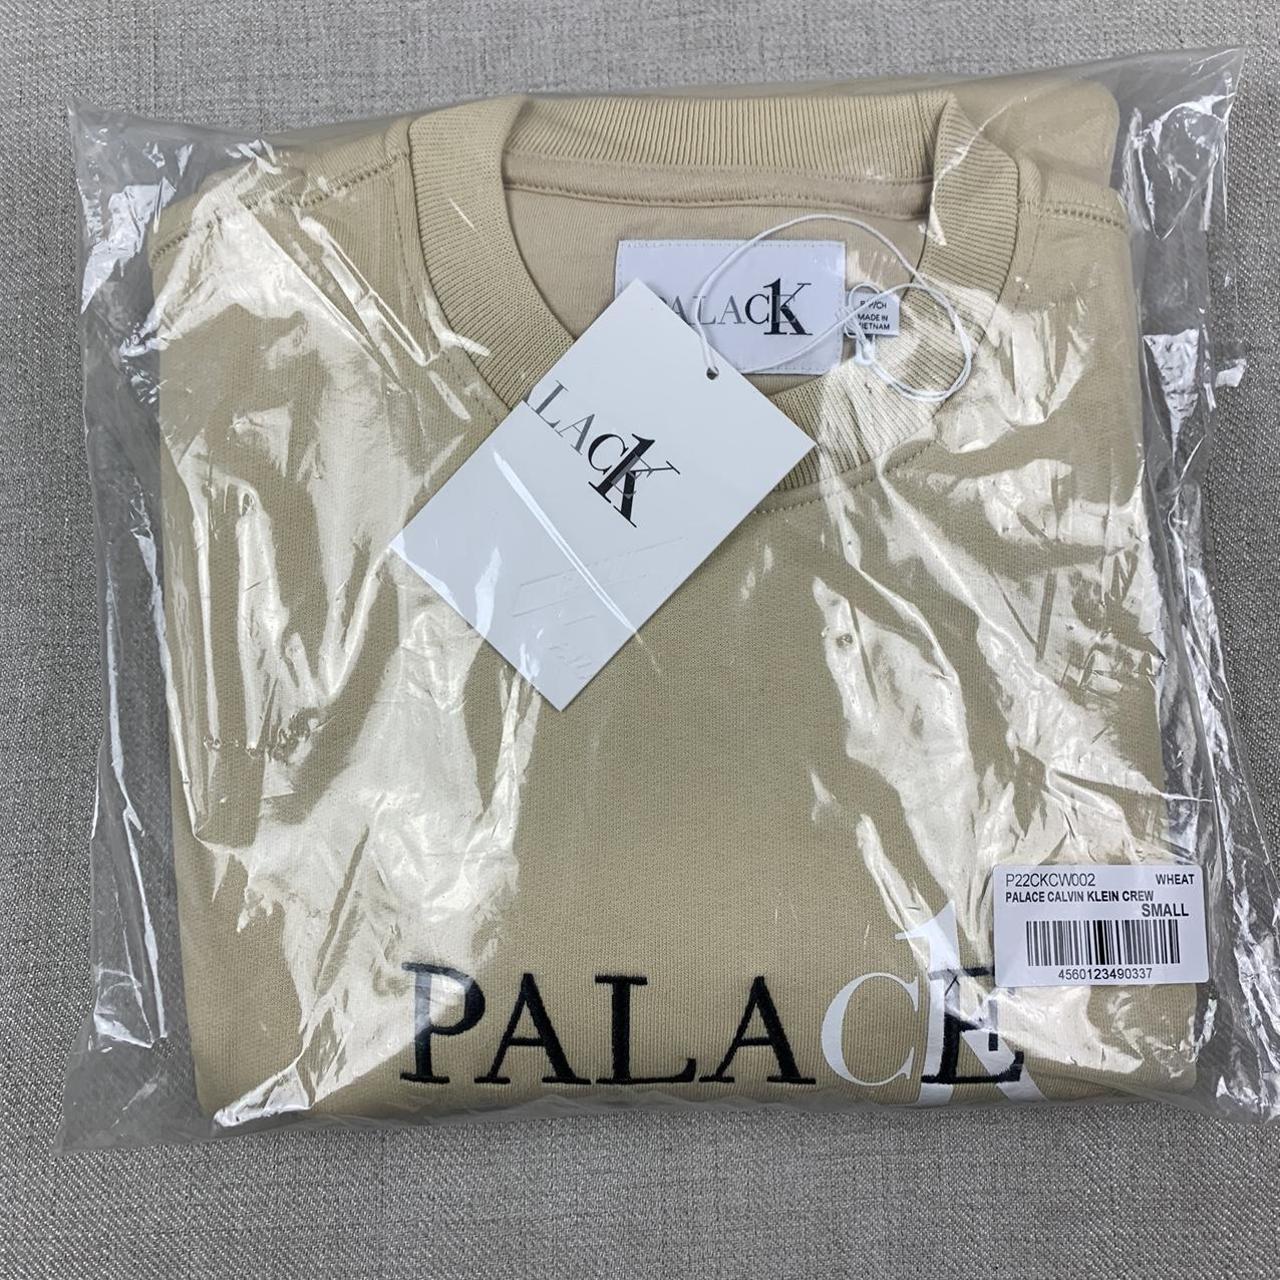 Palace Men's Cream and White Jumper (4)